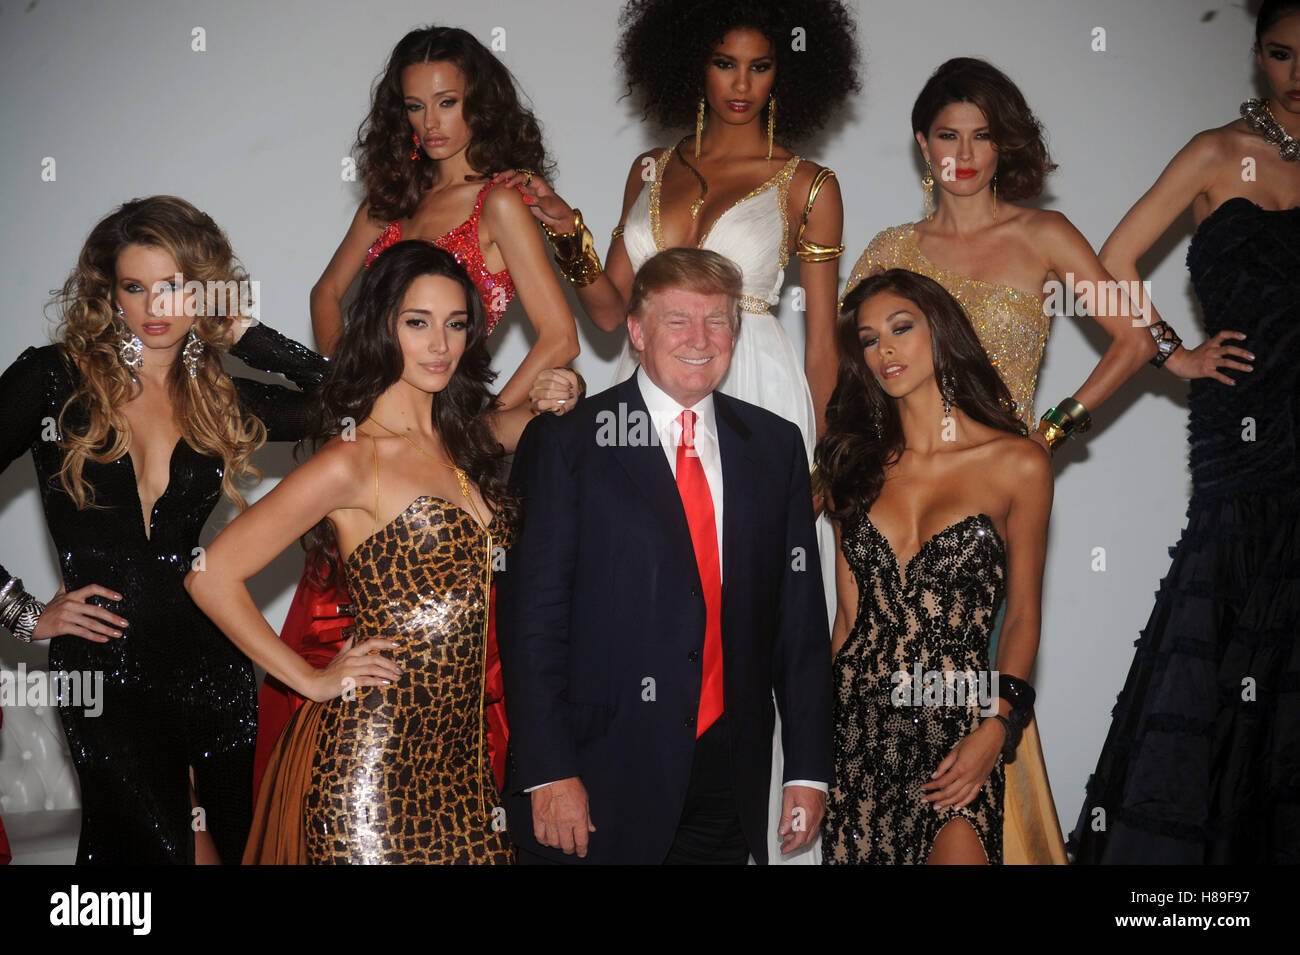 Donald Trump, with Miss USA 2004 Shandi Finnessey, (L) Miss Universe 2003 Amelia Vega and (R) Miss Universe 2008 Dayanna Mendoza attend a Miss Universe photocall at Chelsea Piers, Studio 59 on July 27, 2011 in New York City. Credit: Dennis Van Tine/MediaP Stock Photo